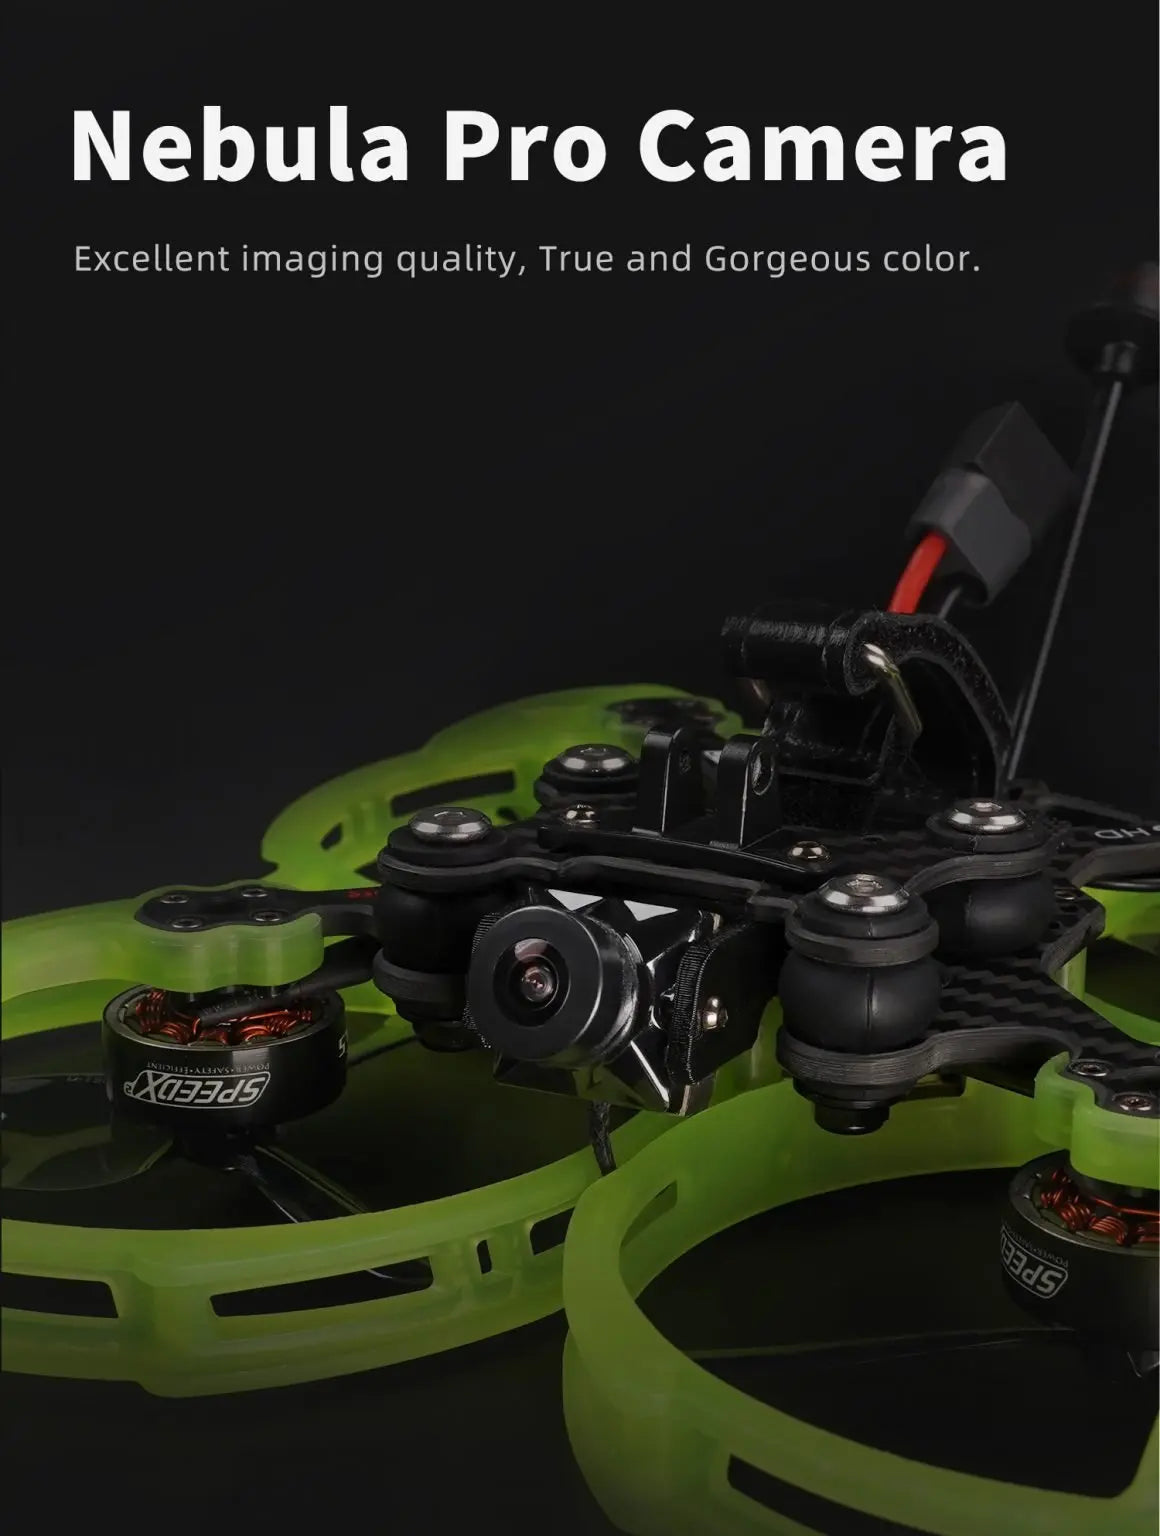 GEPRC CineLog35 Cinewhoop, Nebula Pro Camera Excellent imaging quality, True and Gorgeous color . XTZ as